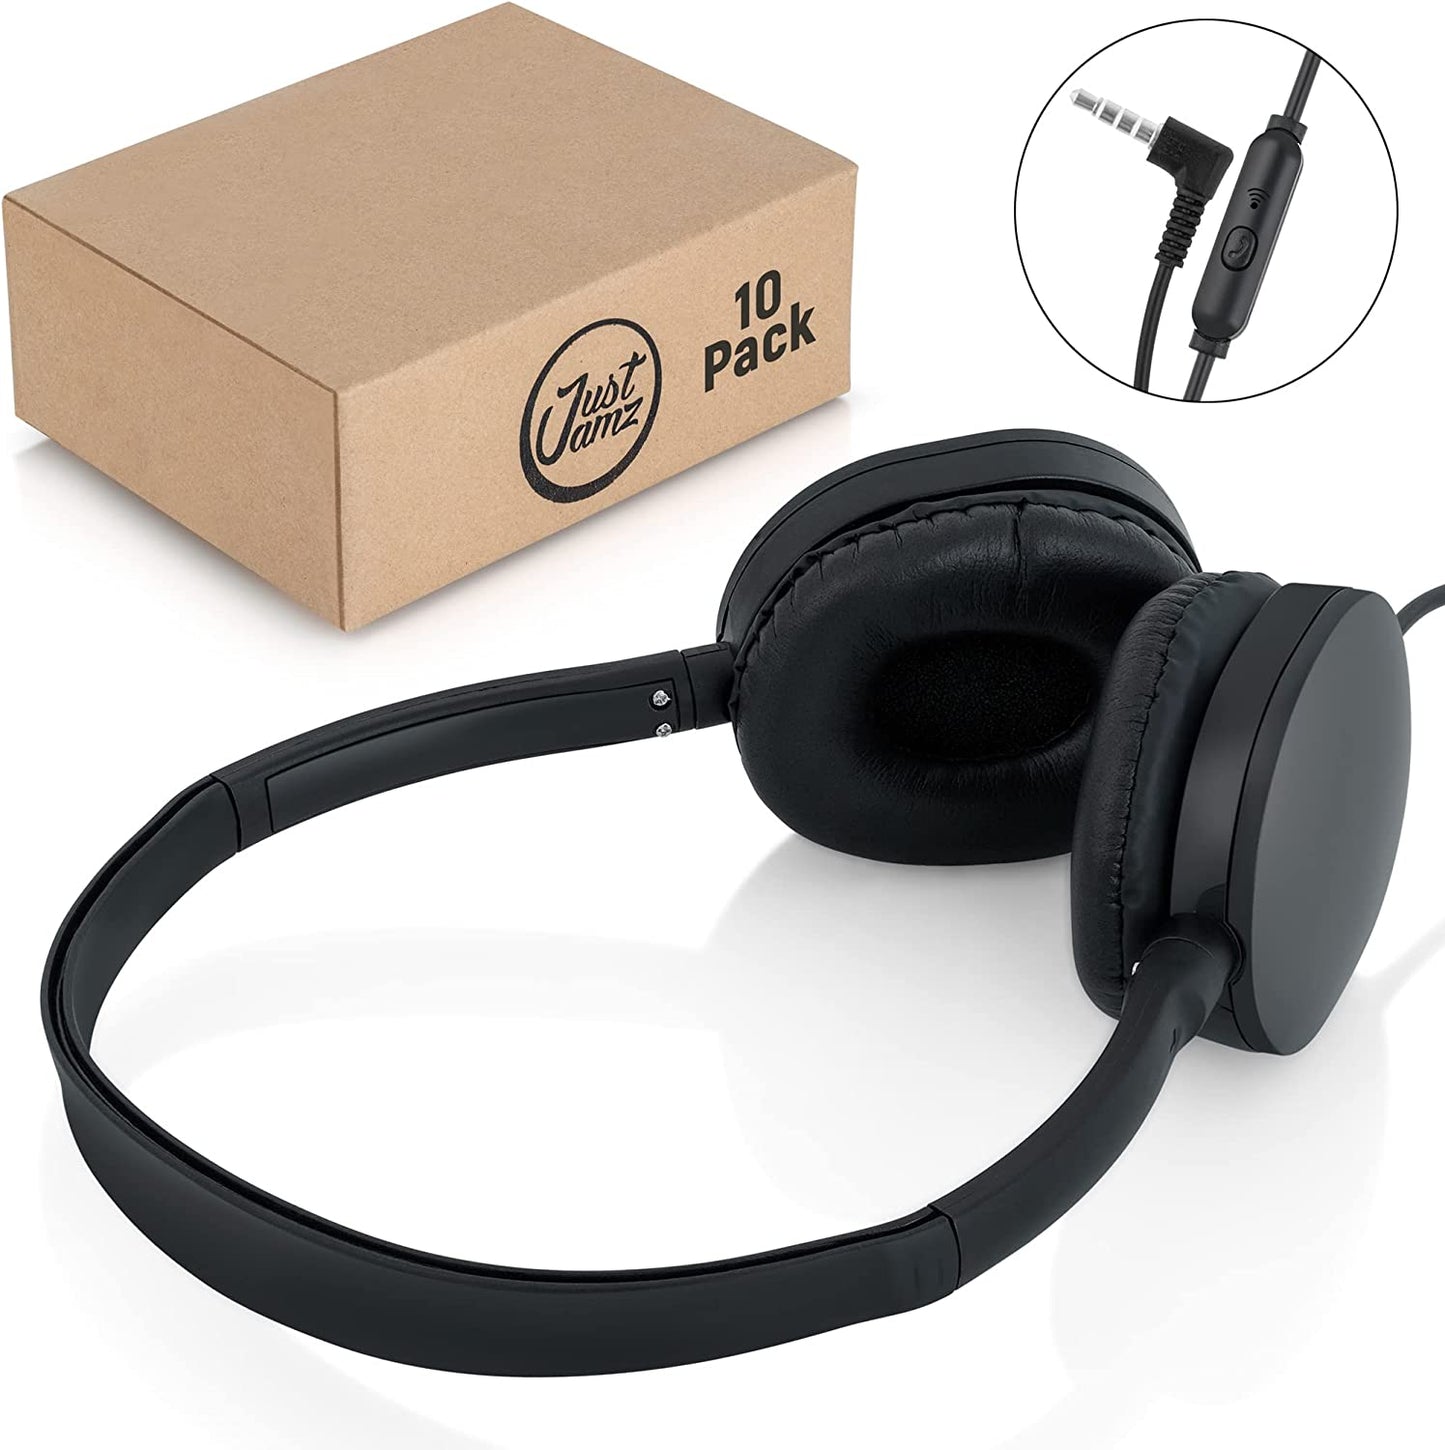 JustJamz® Headphones | 10 Pack | Wholesale Bulk Headphones | Headphones with Microphone | Bulk Over-Ear Headphones with Mic | Foldable with Soft Leather Cushion | HQ Stereo Sound 3.5mm Jack (Black)